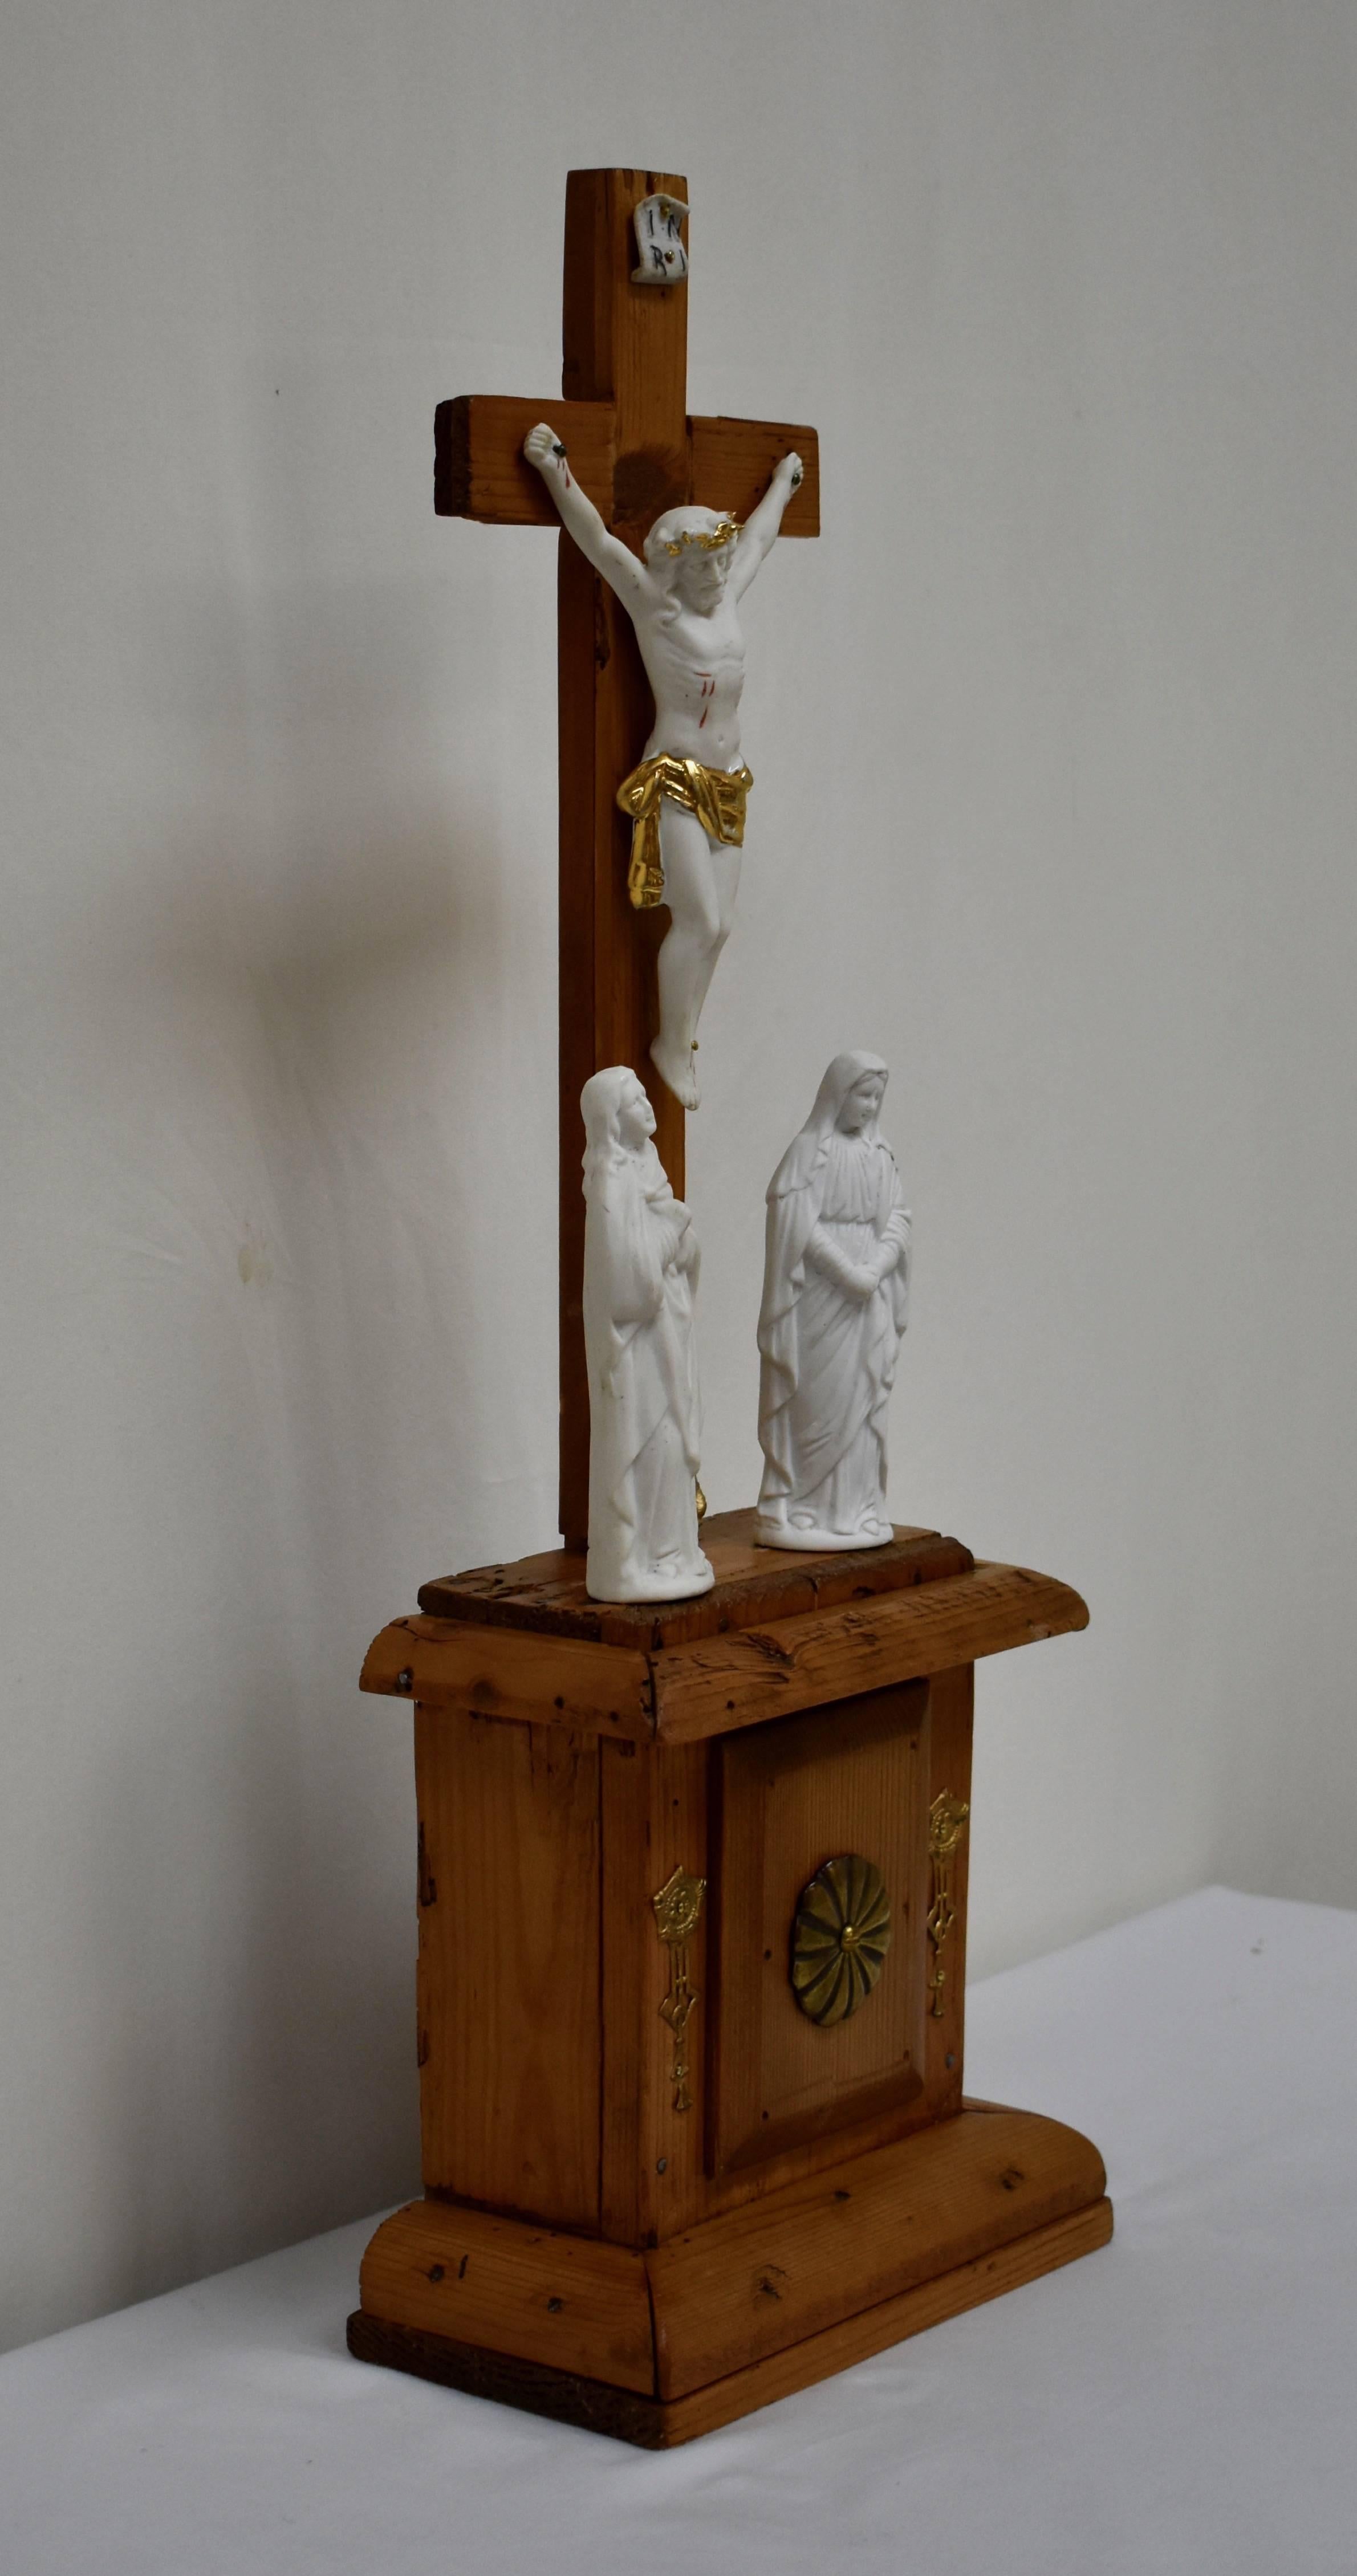 We found this beautiful devotional piece while rooting through the cellar of a gypsy we know in Eger, Hungary. The plinth and cross were covered in old worn and moth-eaten purple velvet which, when removed, revealed the lovely pine beneath, and